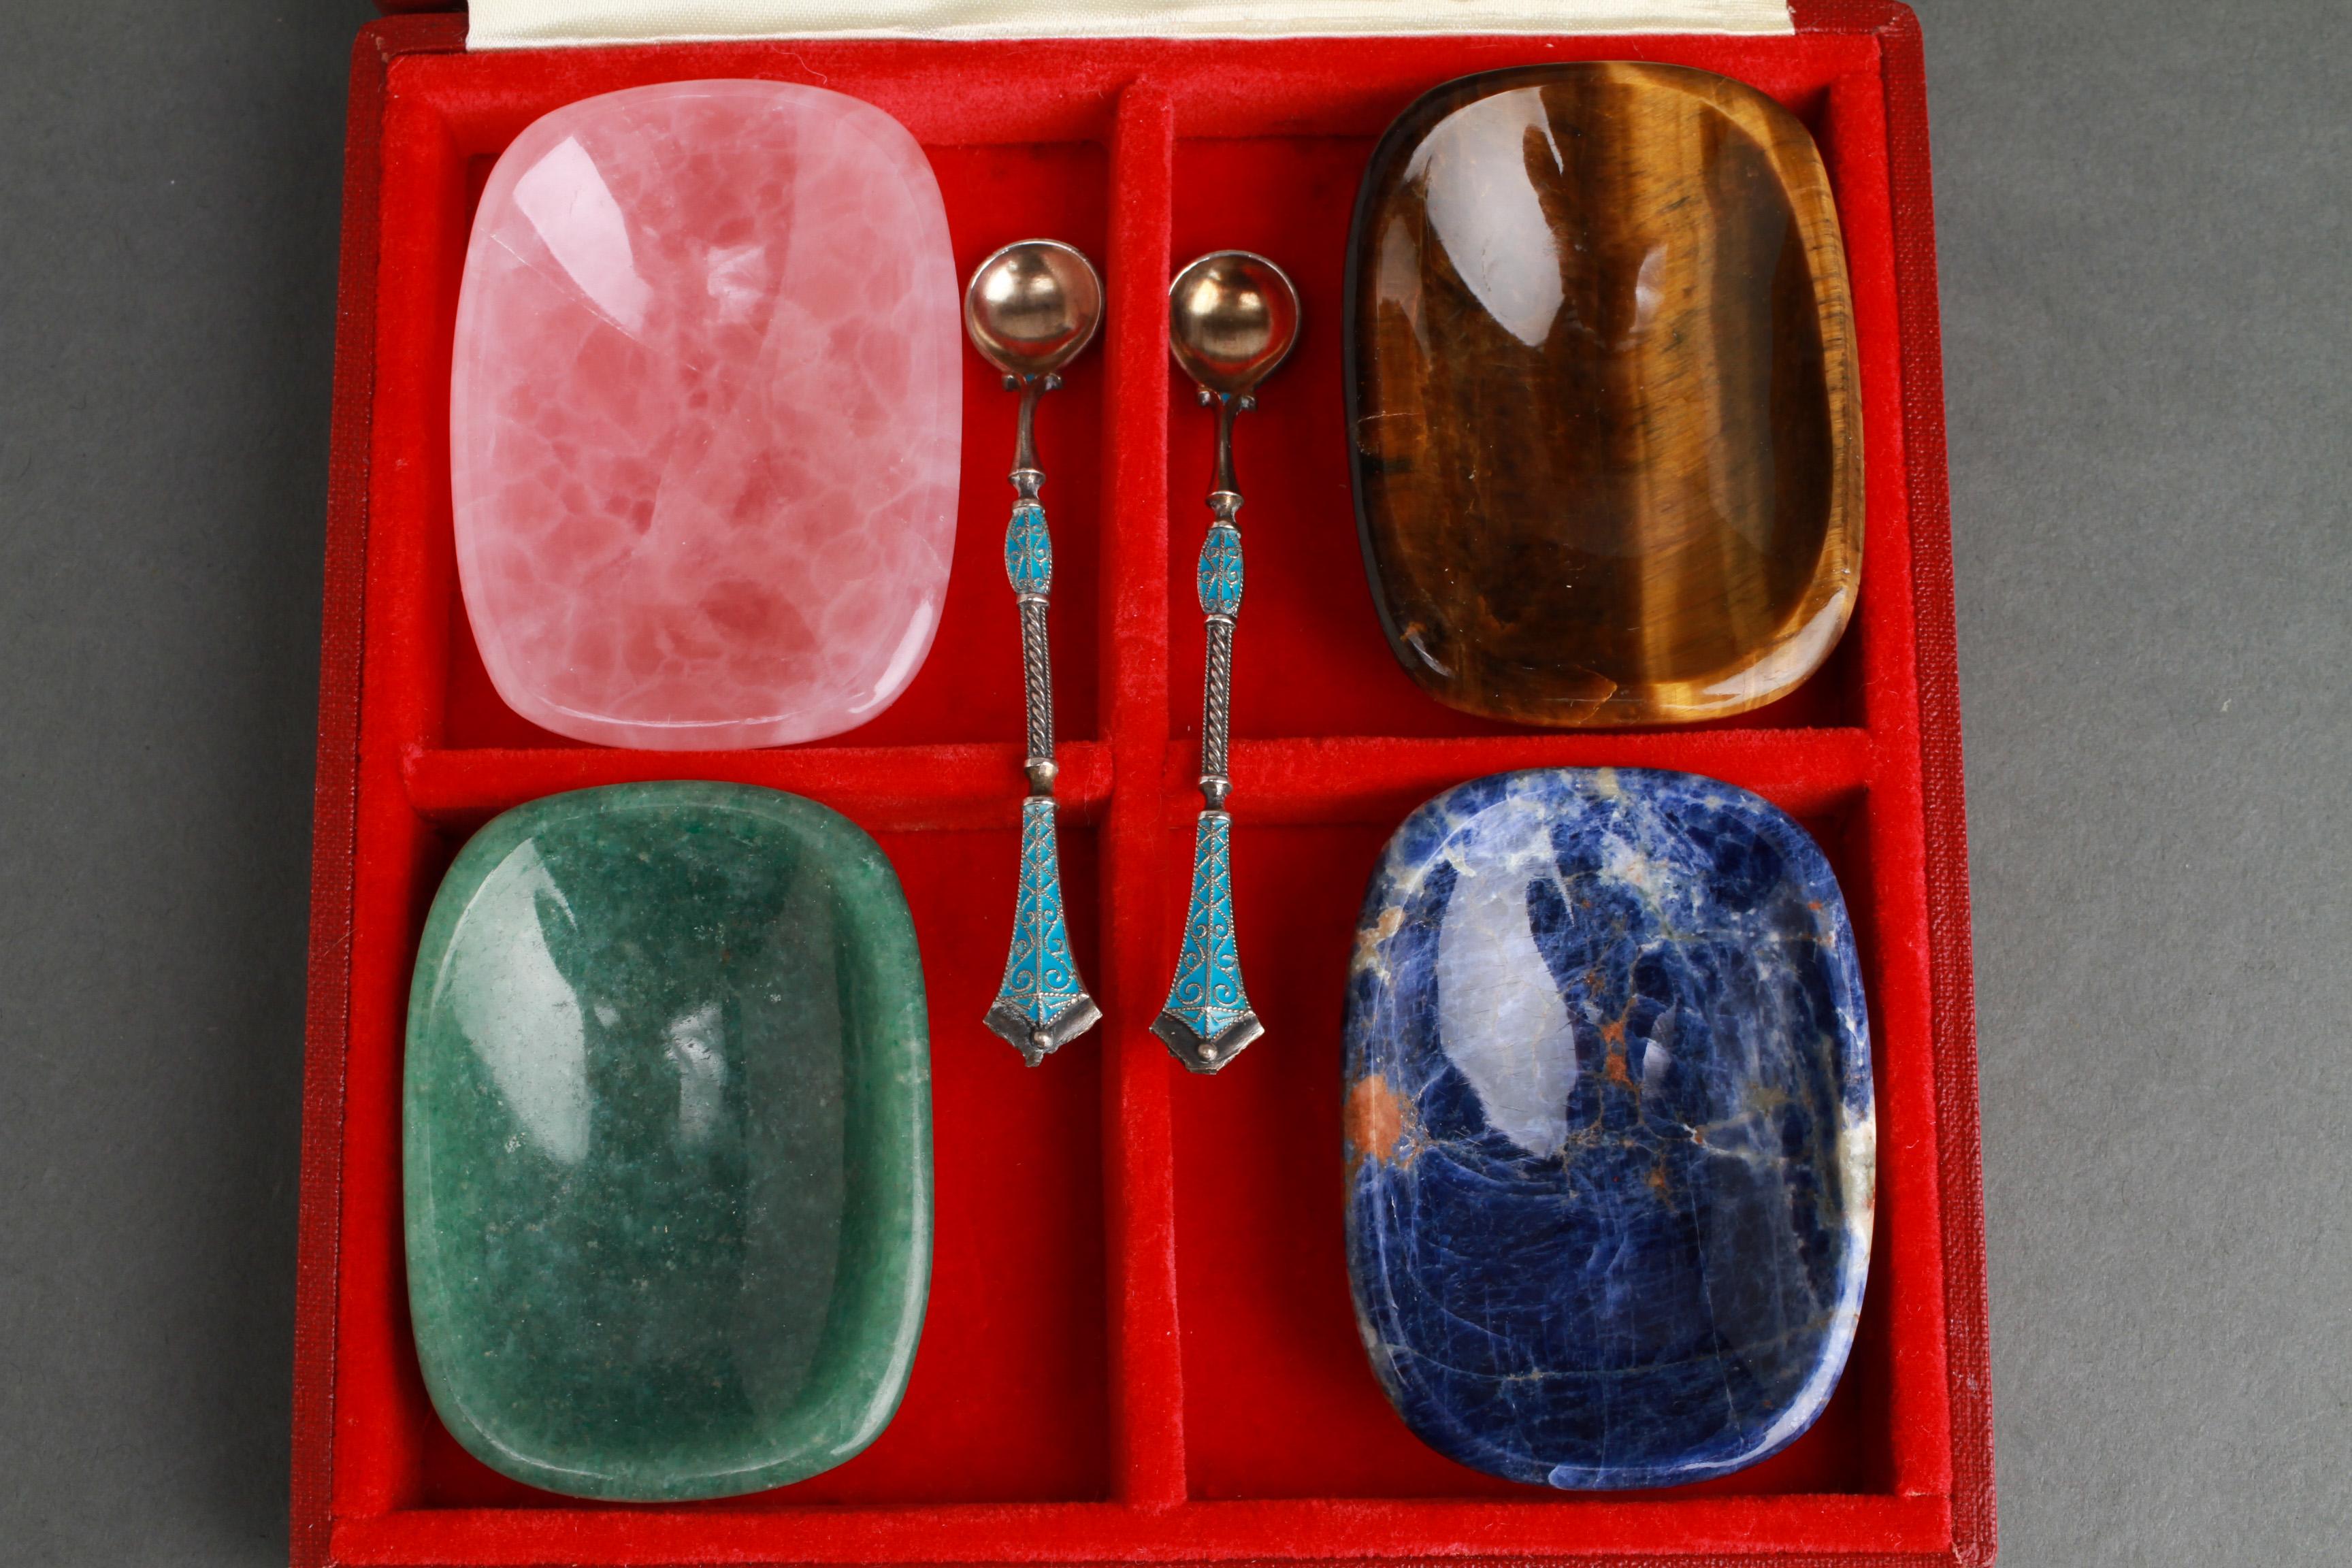 English group of four hardstone salts by Asprey & Co. The group includes rose quartz, jade, sodalite, and tiger eye, in original box. Comes with two associated English silver and enamel spoons. Salts: 2.5